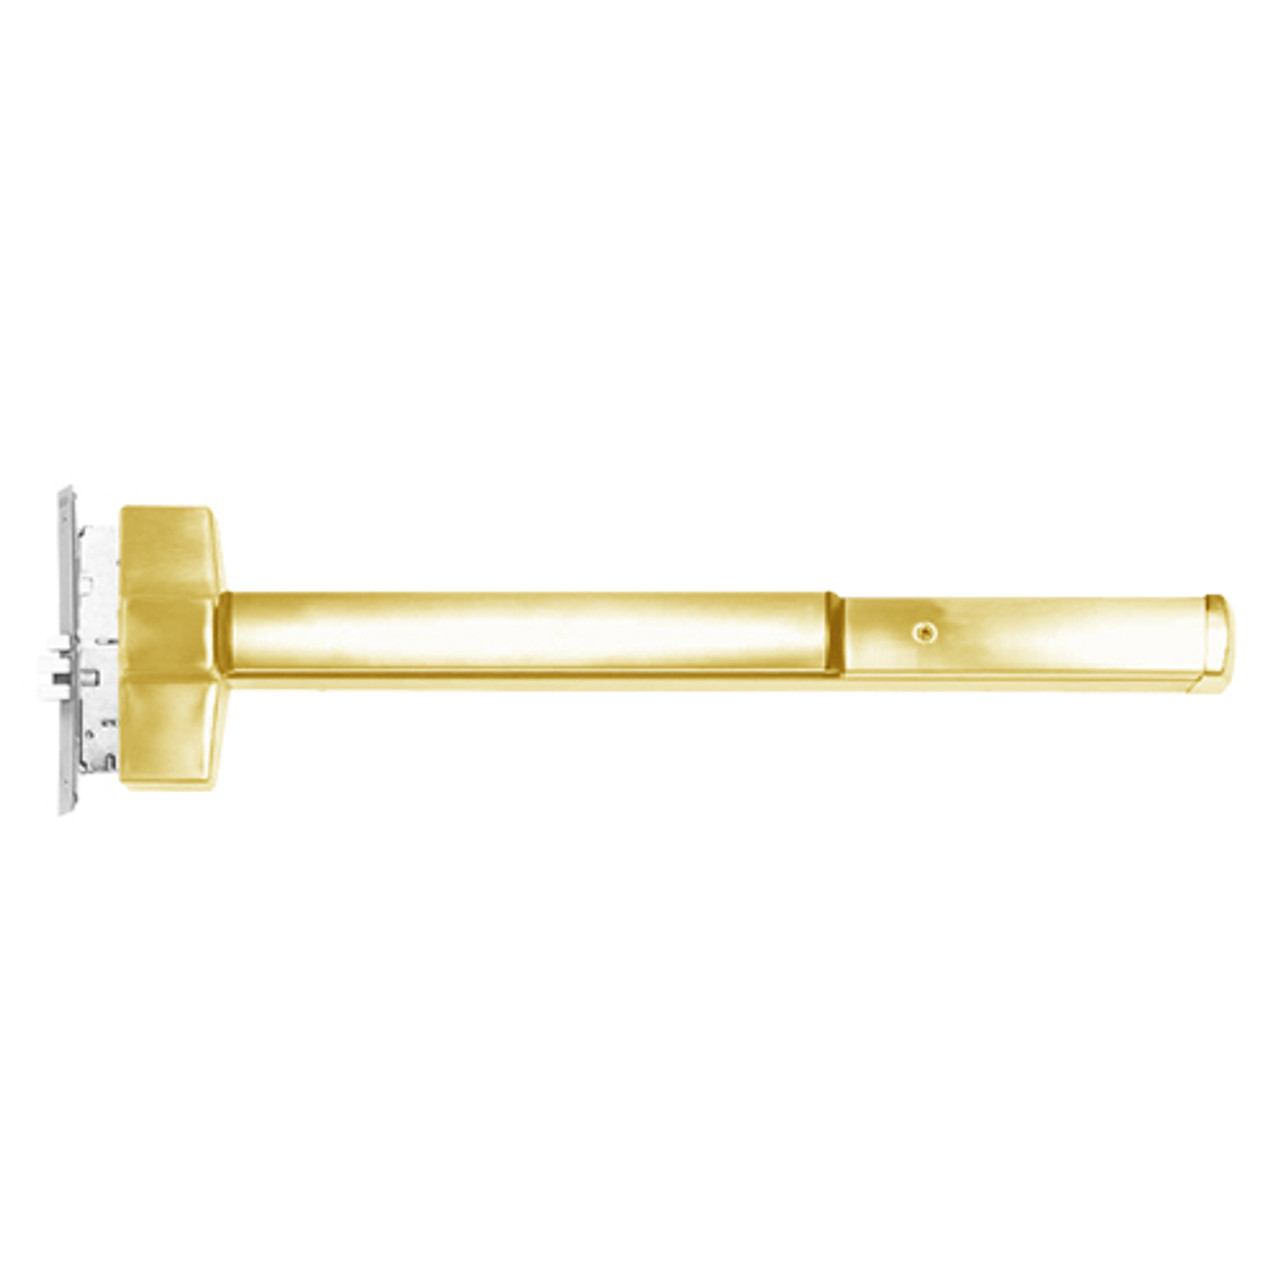 ED5600L-605-W048-MELR-M92-LHR Corbin ED5600 Series Non Fire Rated Mortise Exit Device with Motorized Latch Retraction and Touchbar Monitoring in Bright Brass Finish